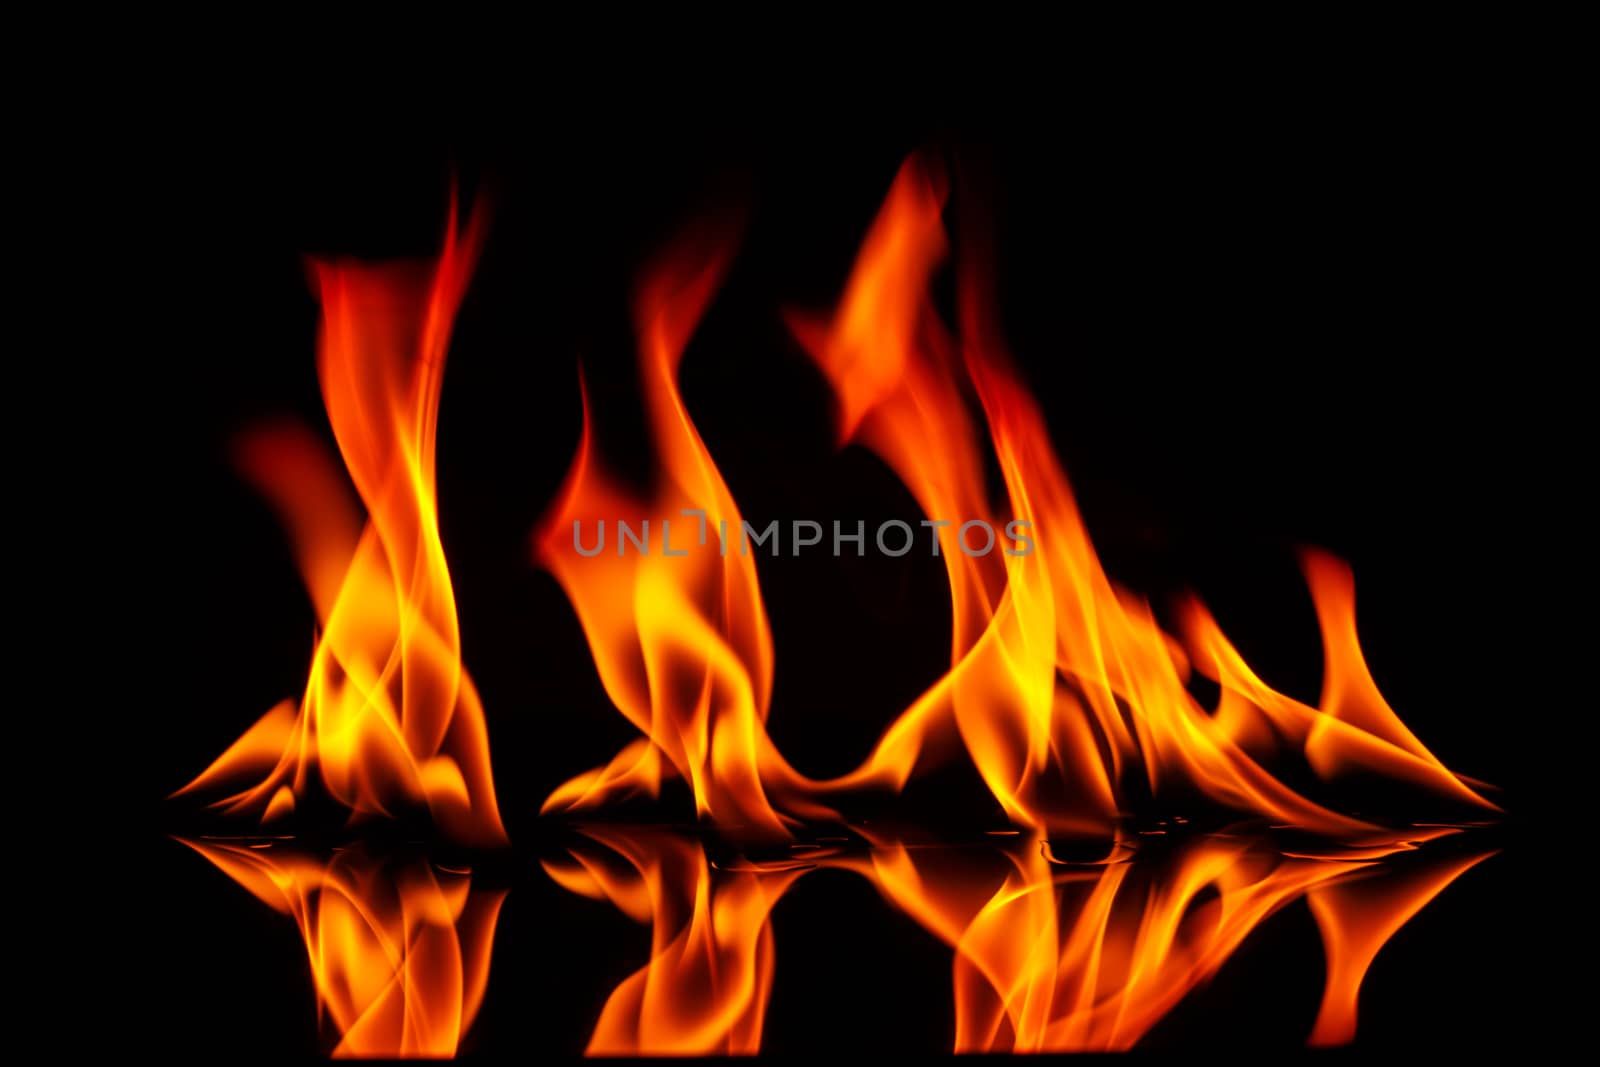 Fire flames on a black background blur